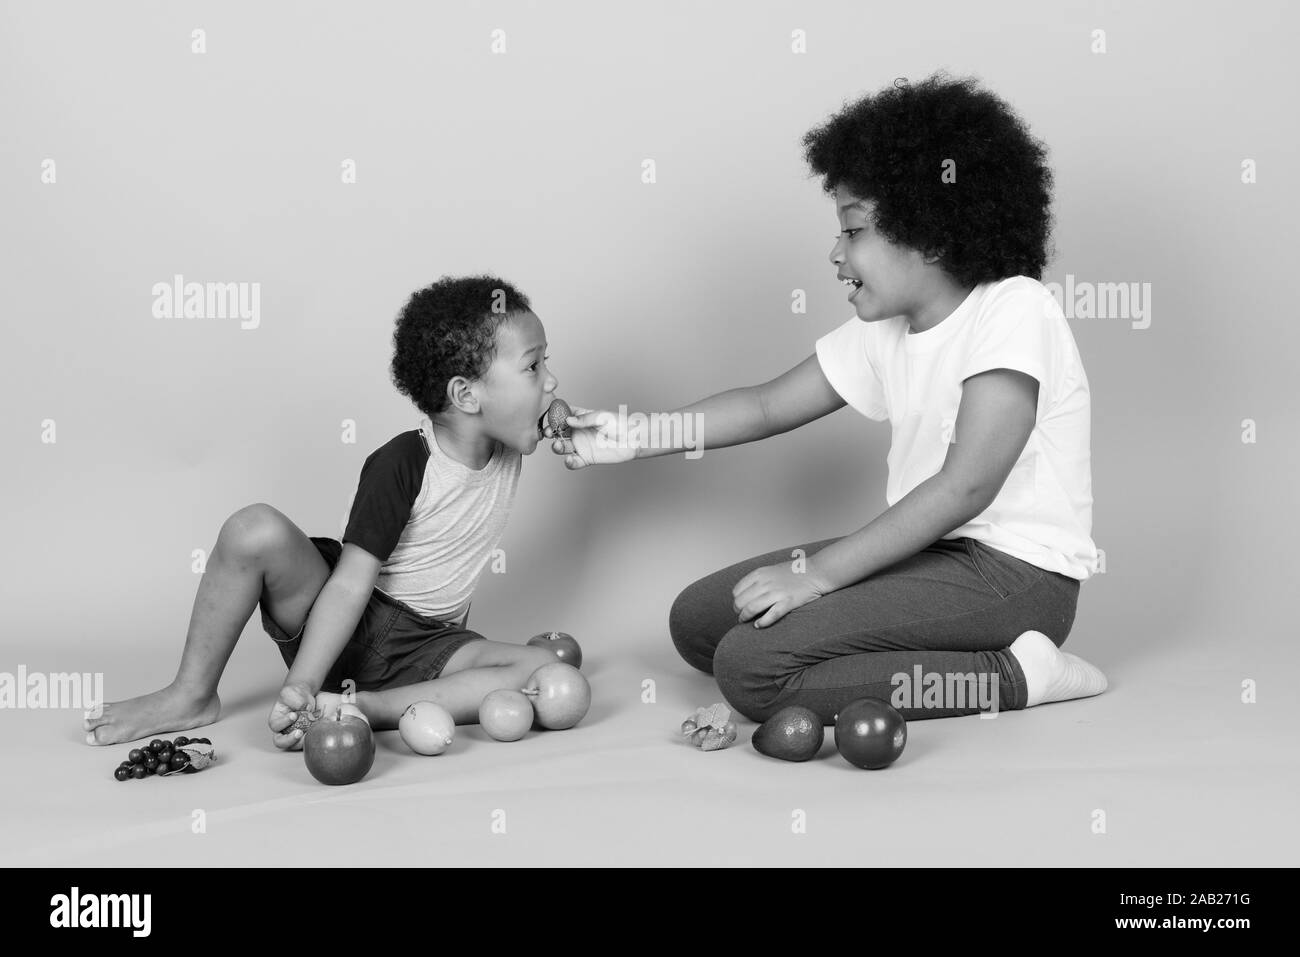 Young cute African siblings together in black and white Stock Photo